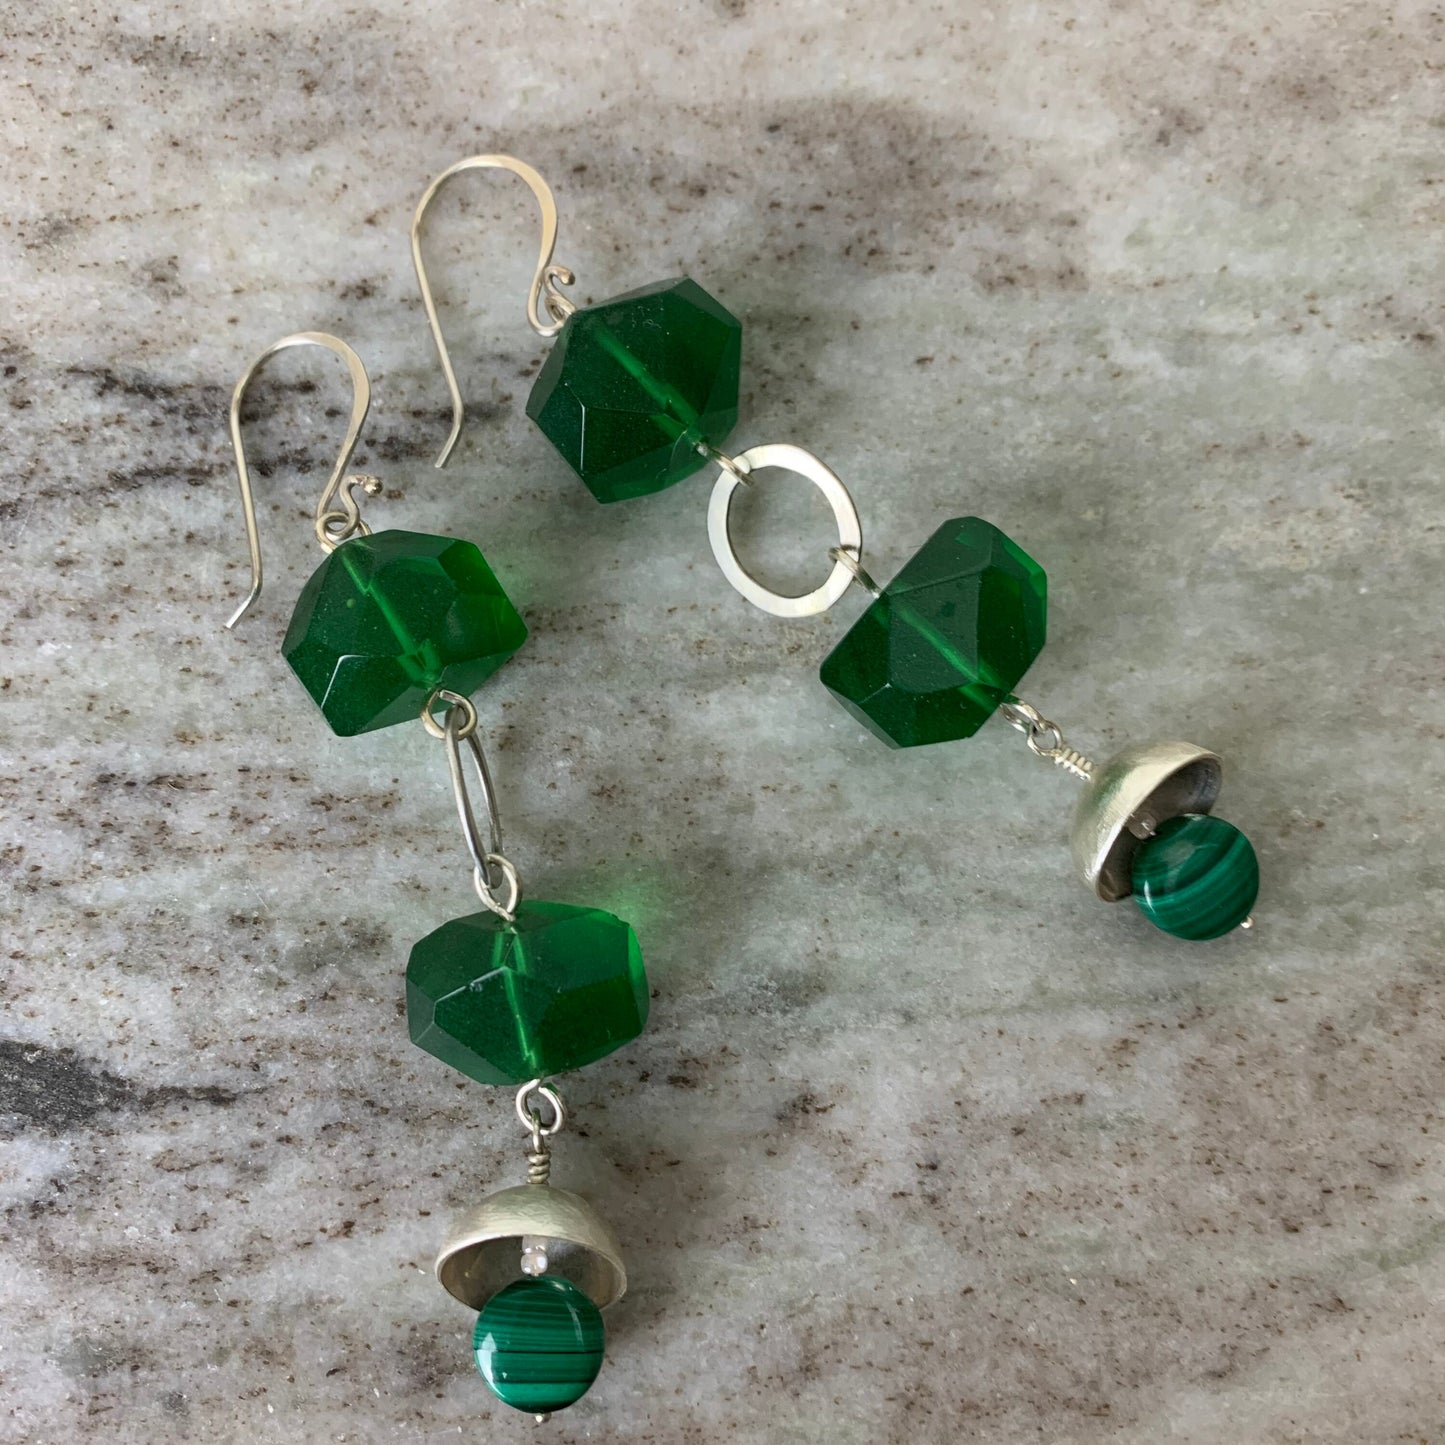 Green glass bead earrings - dangle earrings with malachite and sterling -statement earrings for women - handmade original design with silver